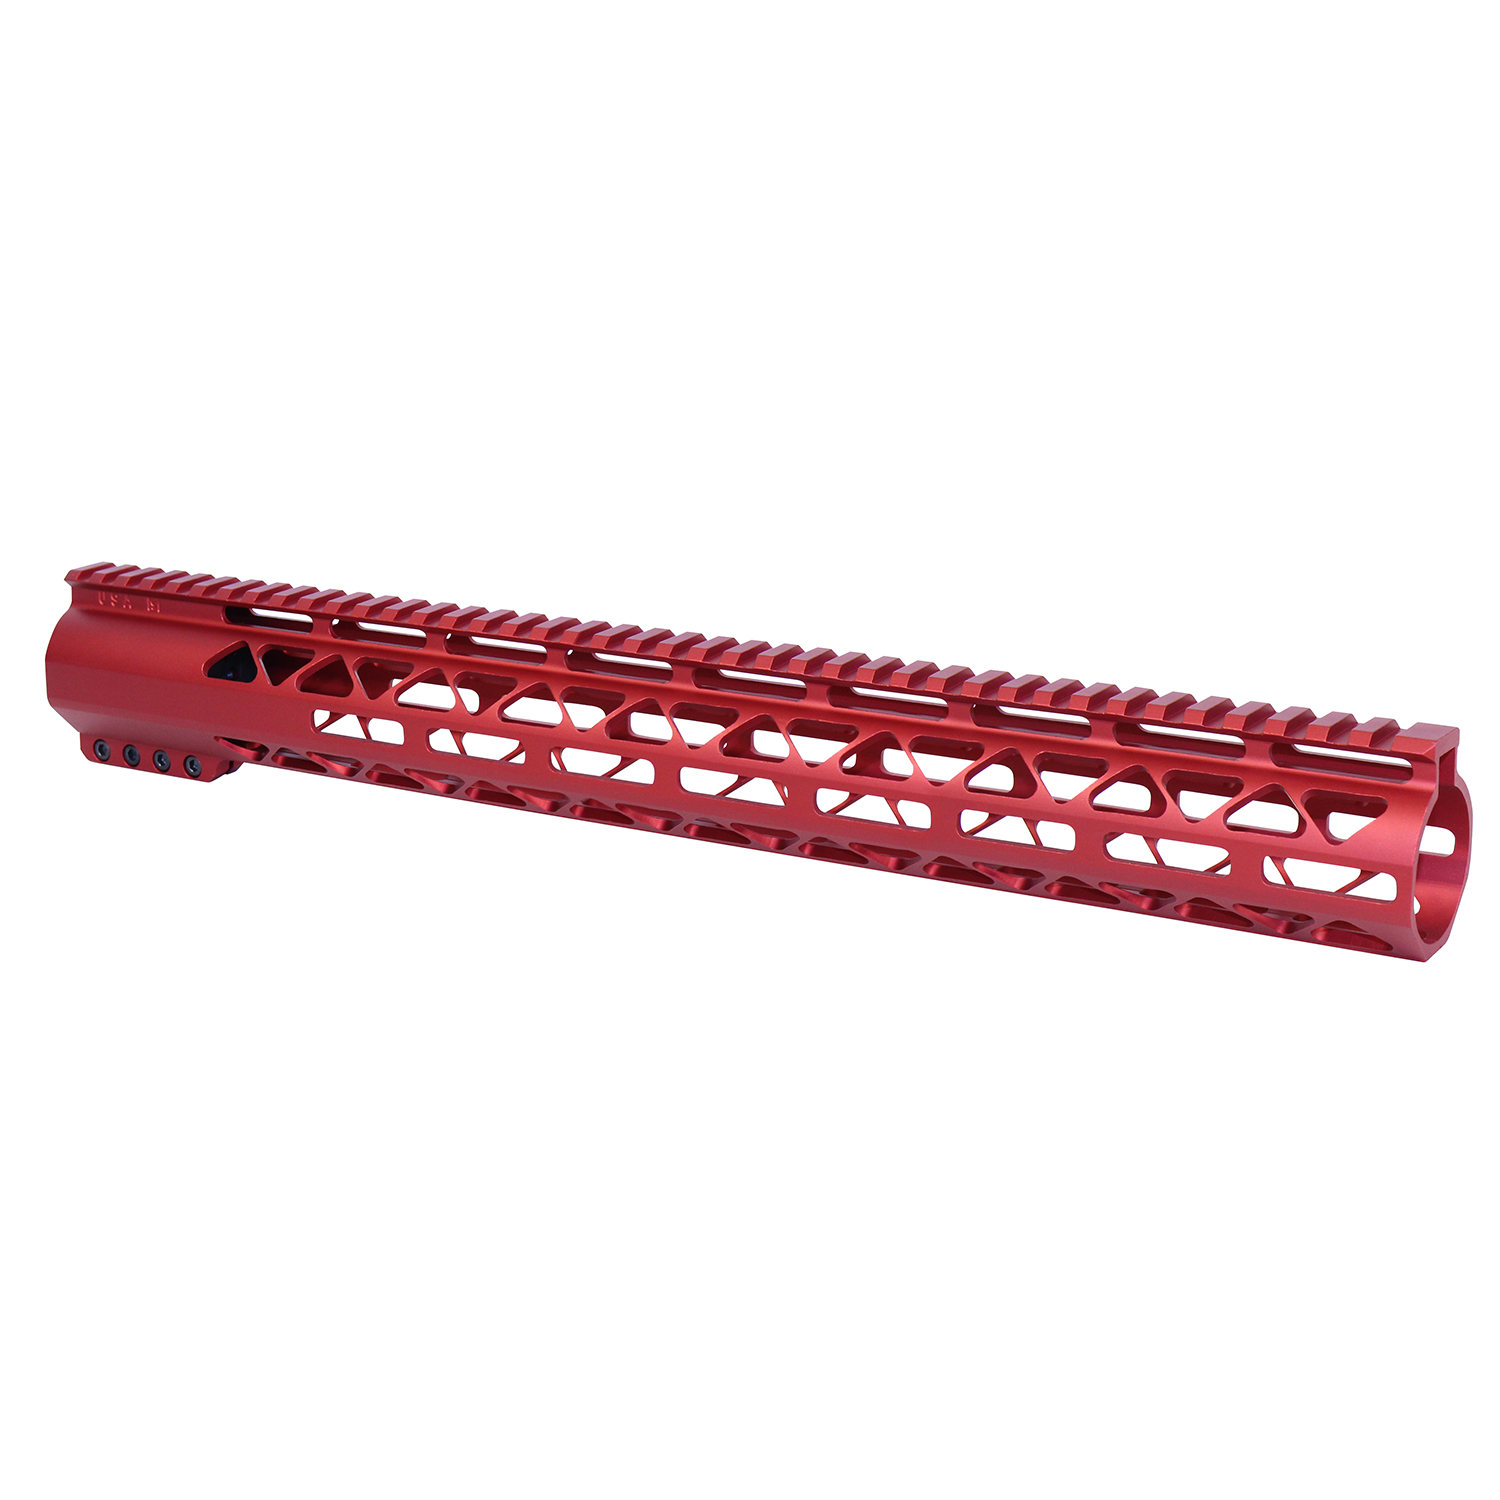 16.5" AIR-LOK Series M-LOK Compression Free Floating Handguard With Monolithic Top Rail (.308 Cal) (Anodized Red)